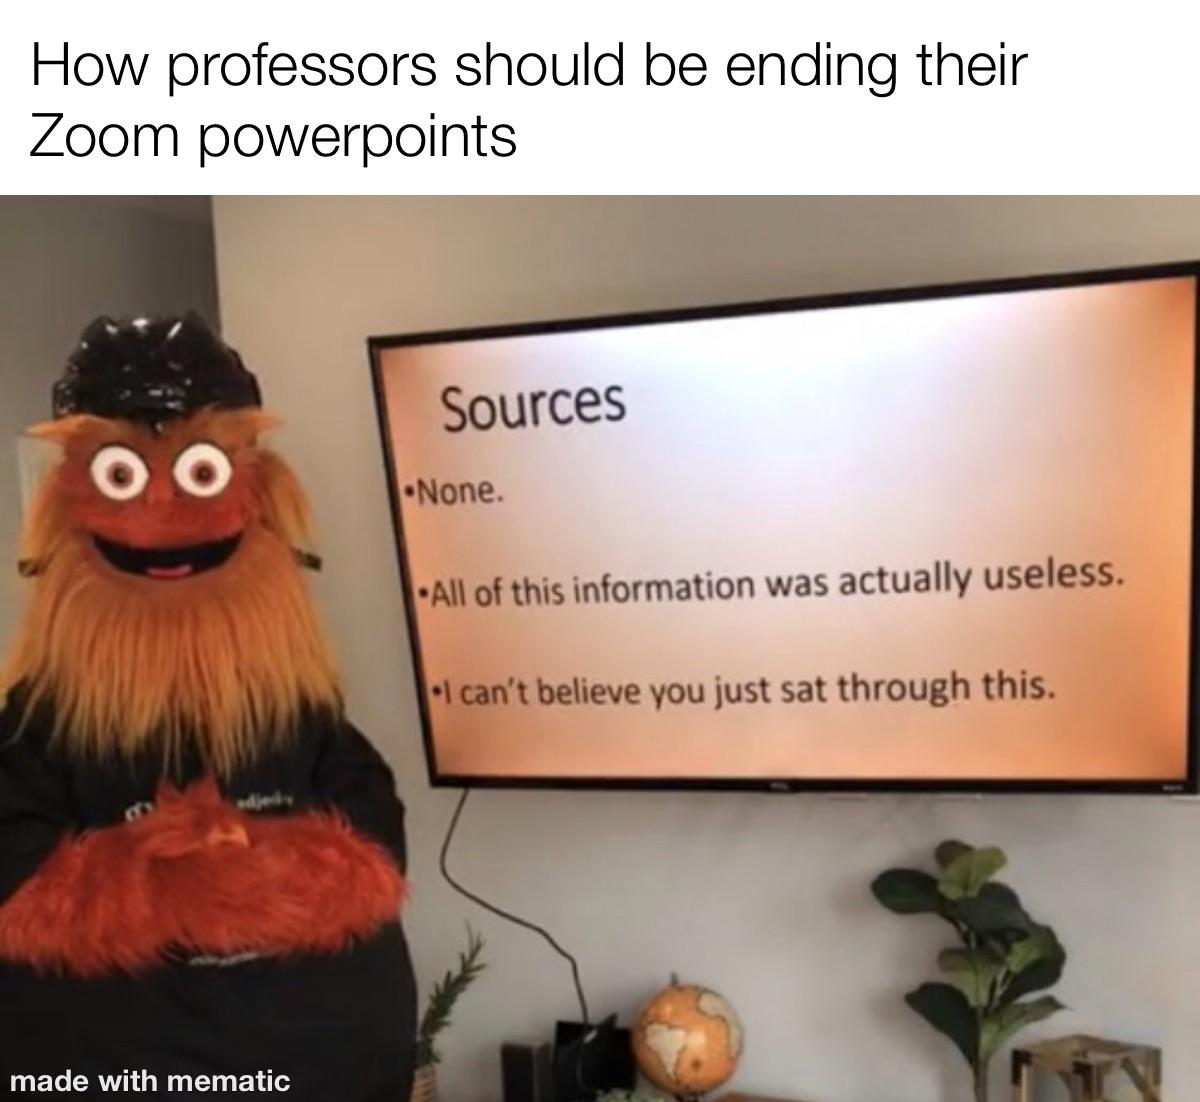 r/collegememes- college dank memes - zoom meme - How professors should be ending their Zoom powerpoints Sources O O .None. All of this information was actually useless. I can't believe you just sat through this. made with mematic